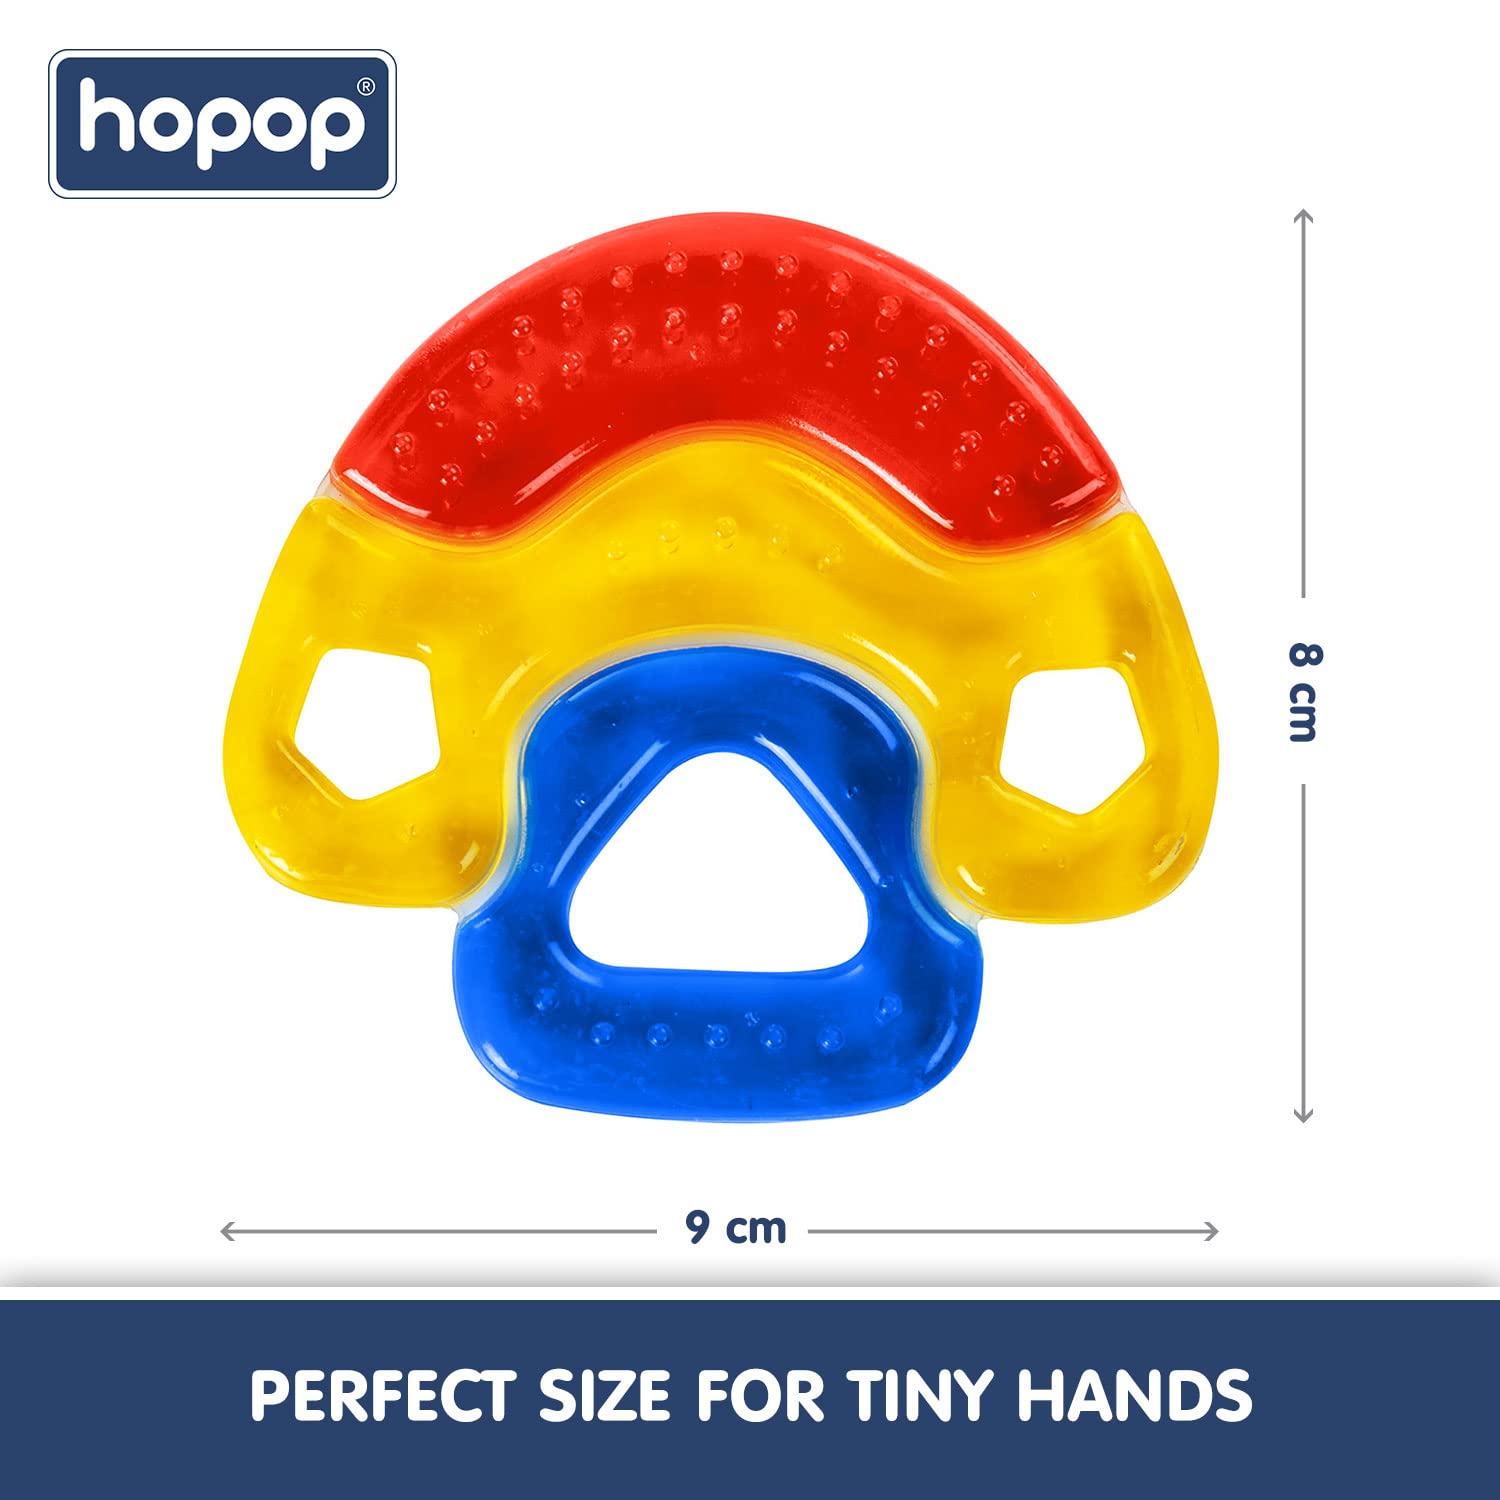 Hopop Easy Grip Water Filled Cooling Teether For Babies - Tree 4m+